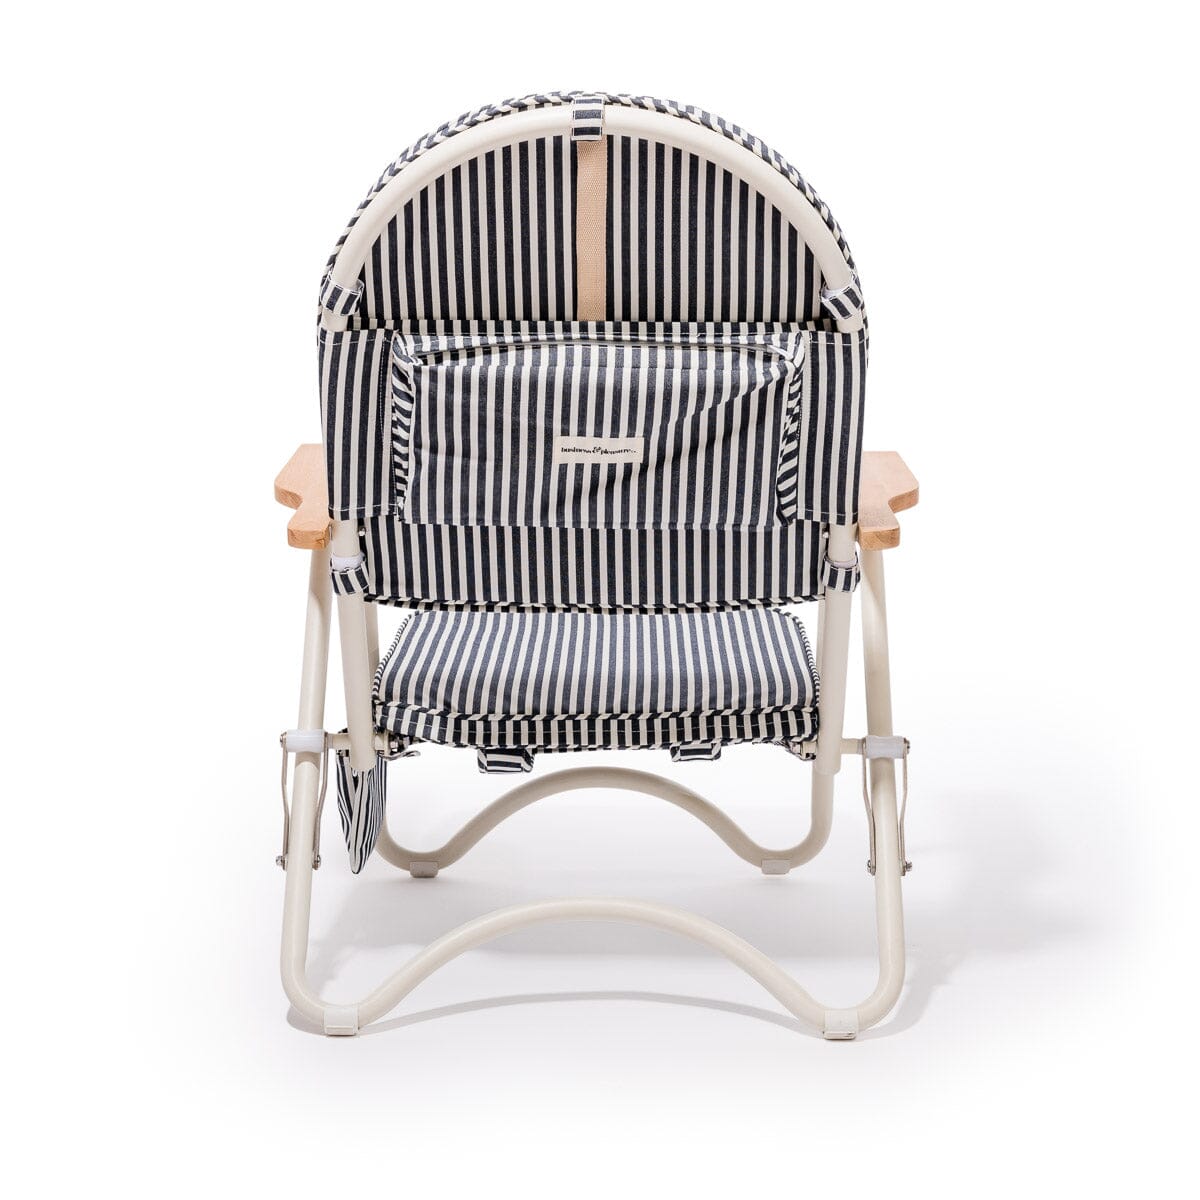 The Pam Chair - Laurens Navy Stripe Pam Chair Business & Pleasure Co 